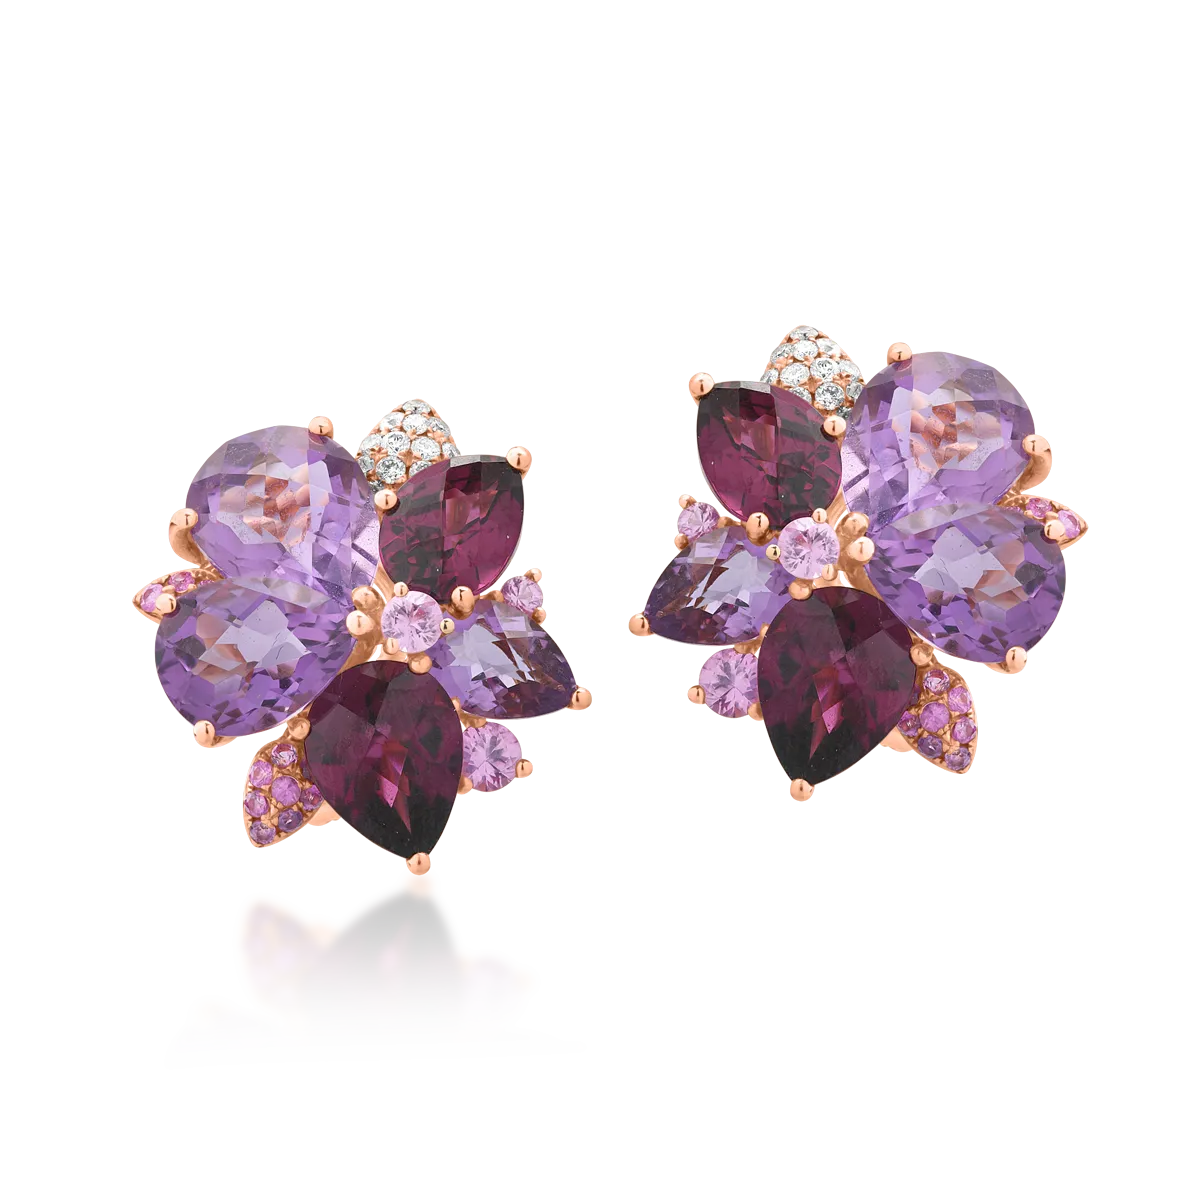 18K rose gold earrings with 9.9ct amethysts and 6.9ct rhodolites